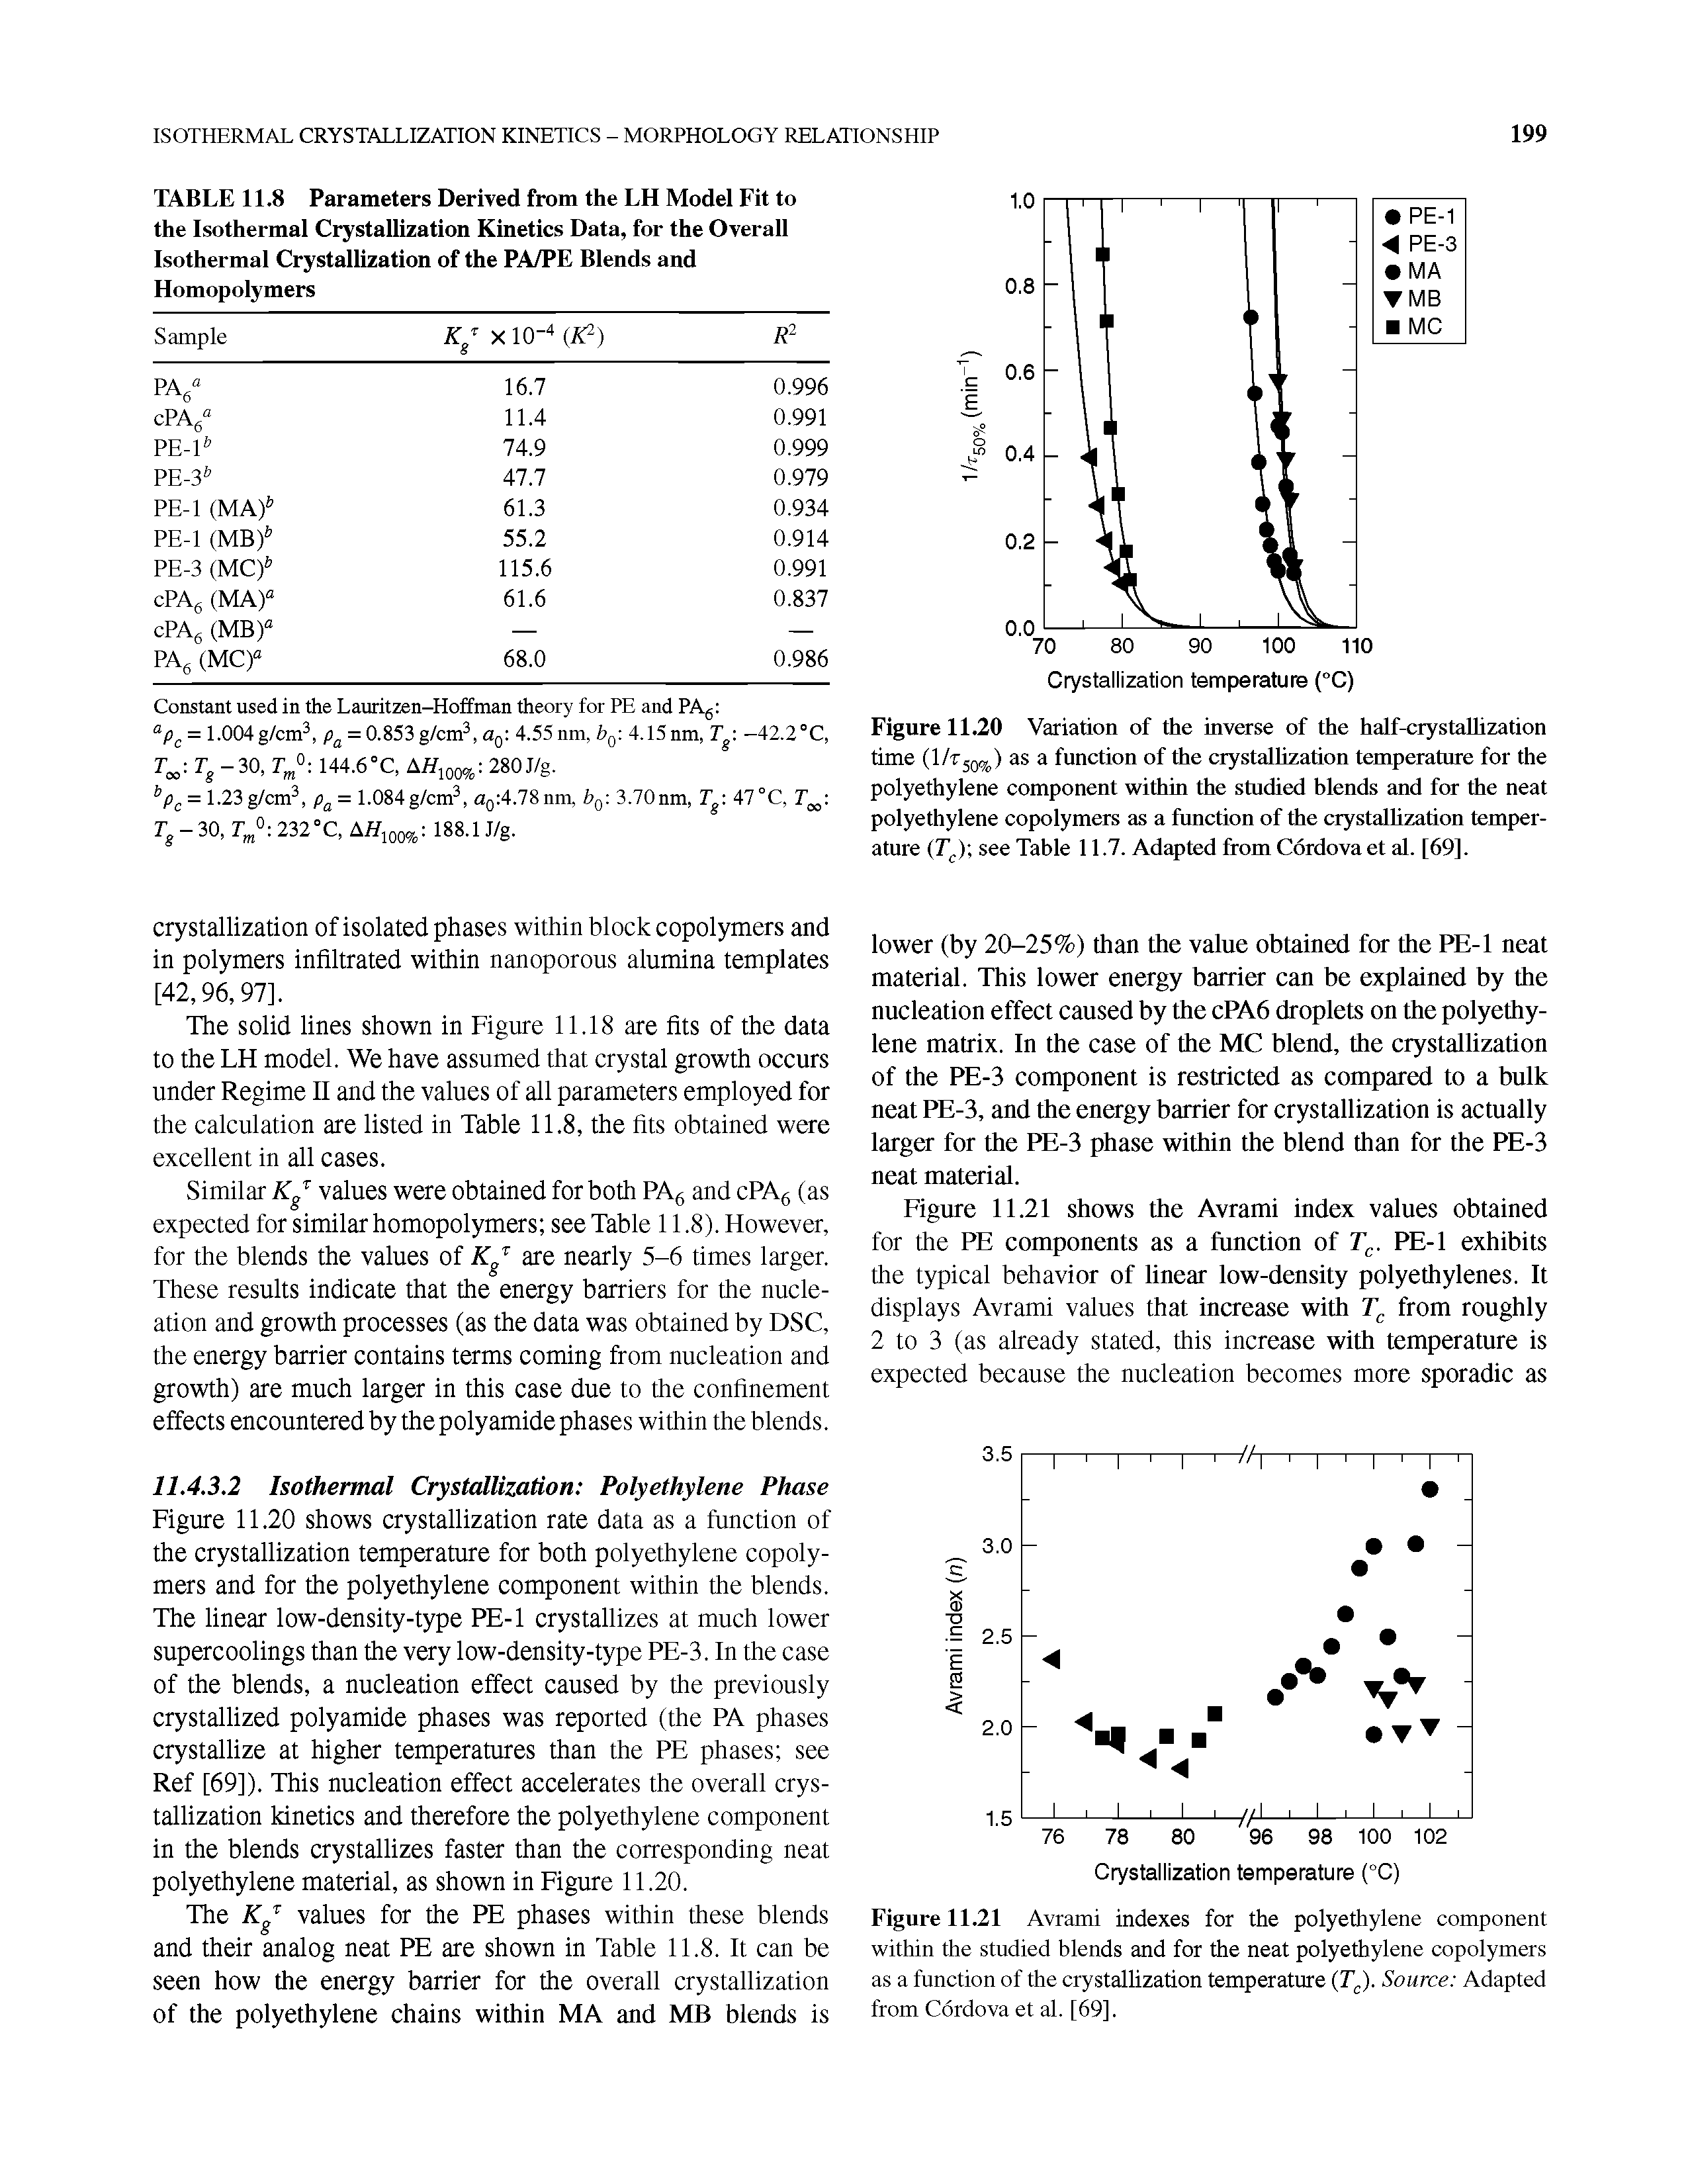 Figure 11.20 Variation of the inverse of the half-ciystalhzation time (l/f5o%) as a funetion of the crystallization temperature for the polyethylene component within the studied blends and for the neat polyethylene copolymers as a function of the crystallization temperature (T ) see Table 11.7. Adapted from Cordova et al. [69].